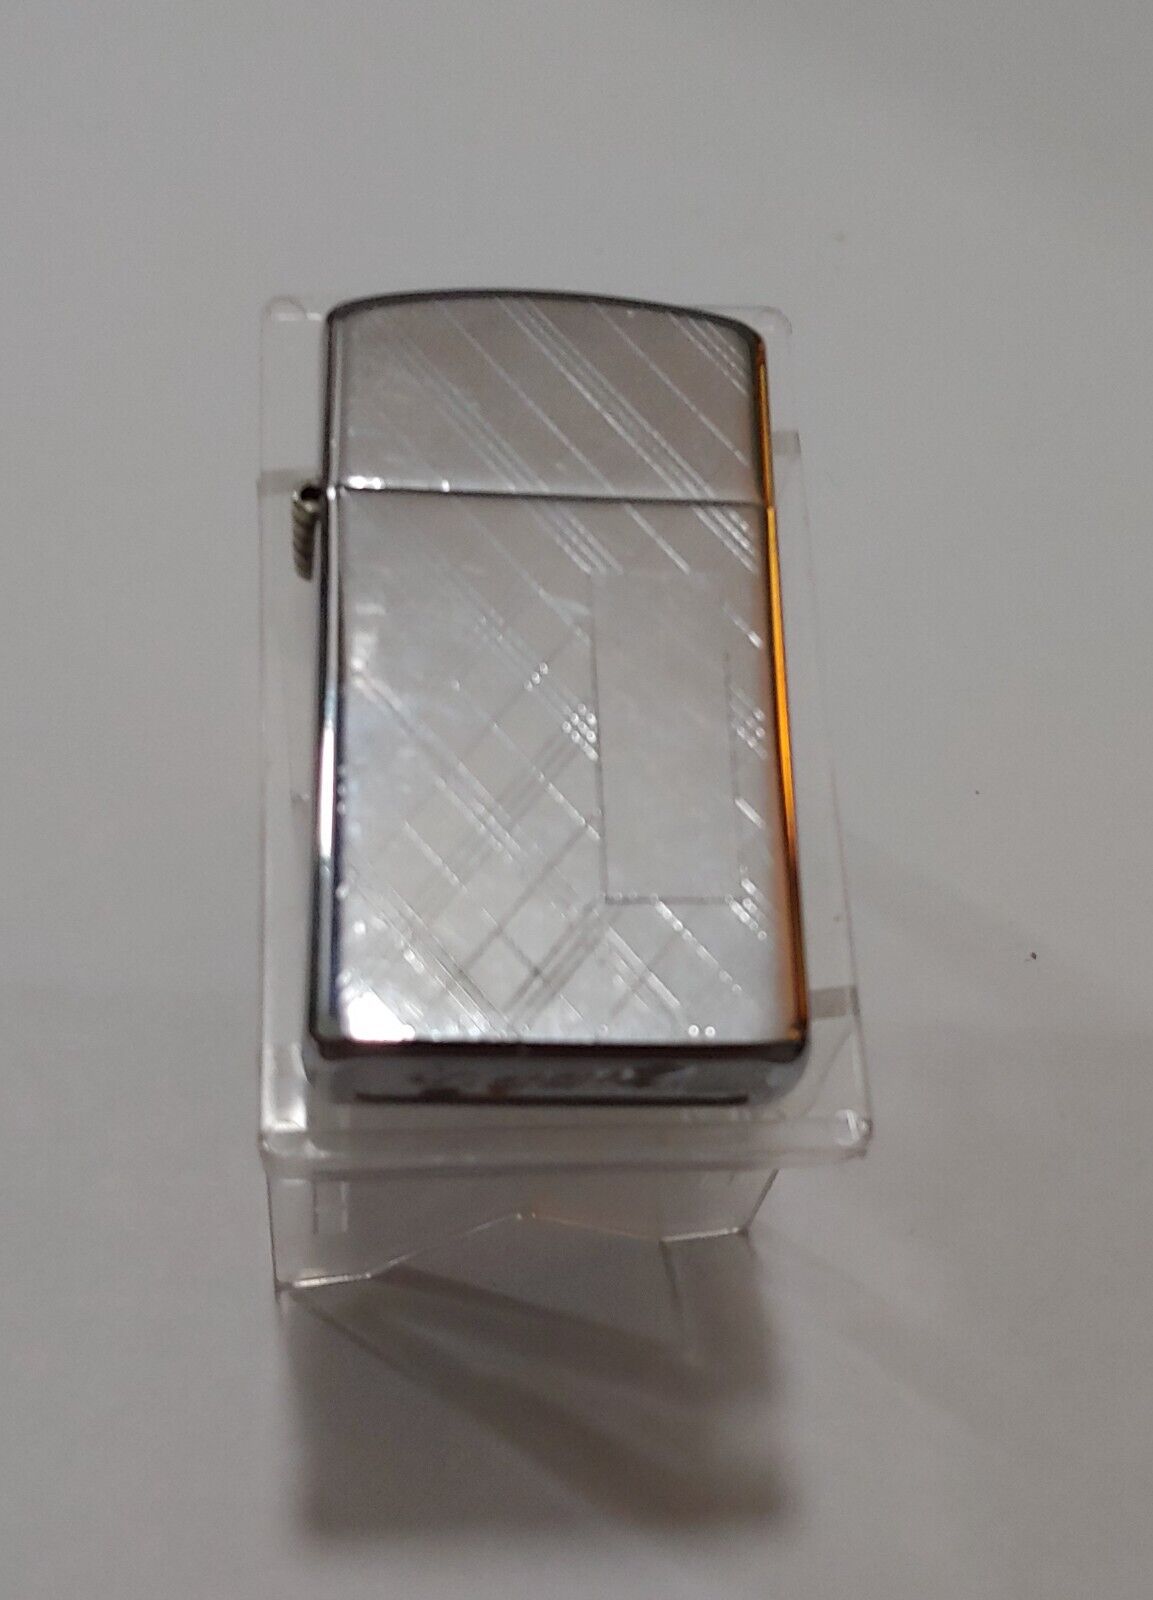 20% OFF on ZIPPO Small Purse/Pocket Size Lighter from the 1950s